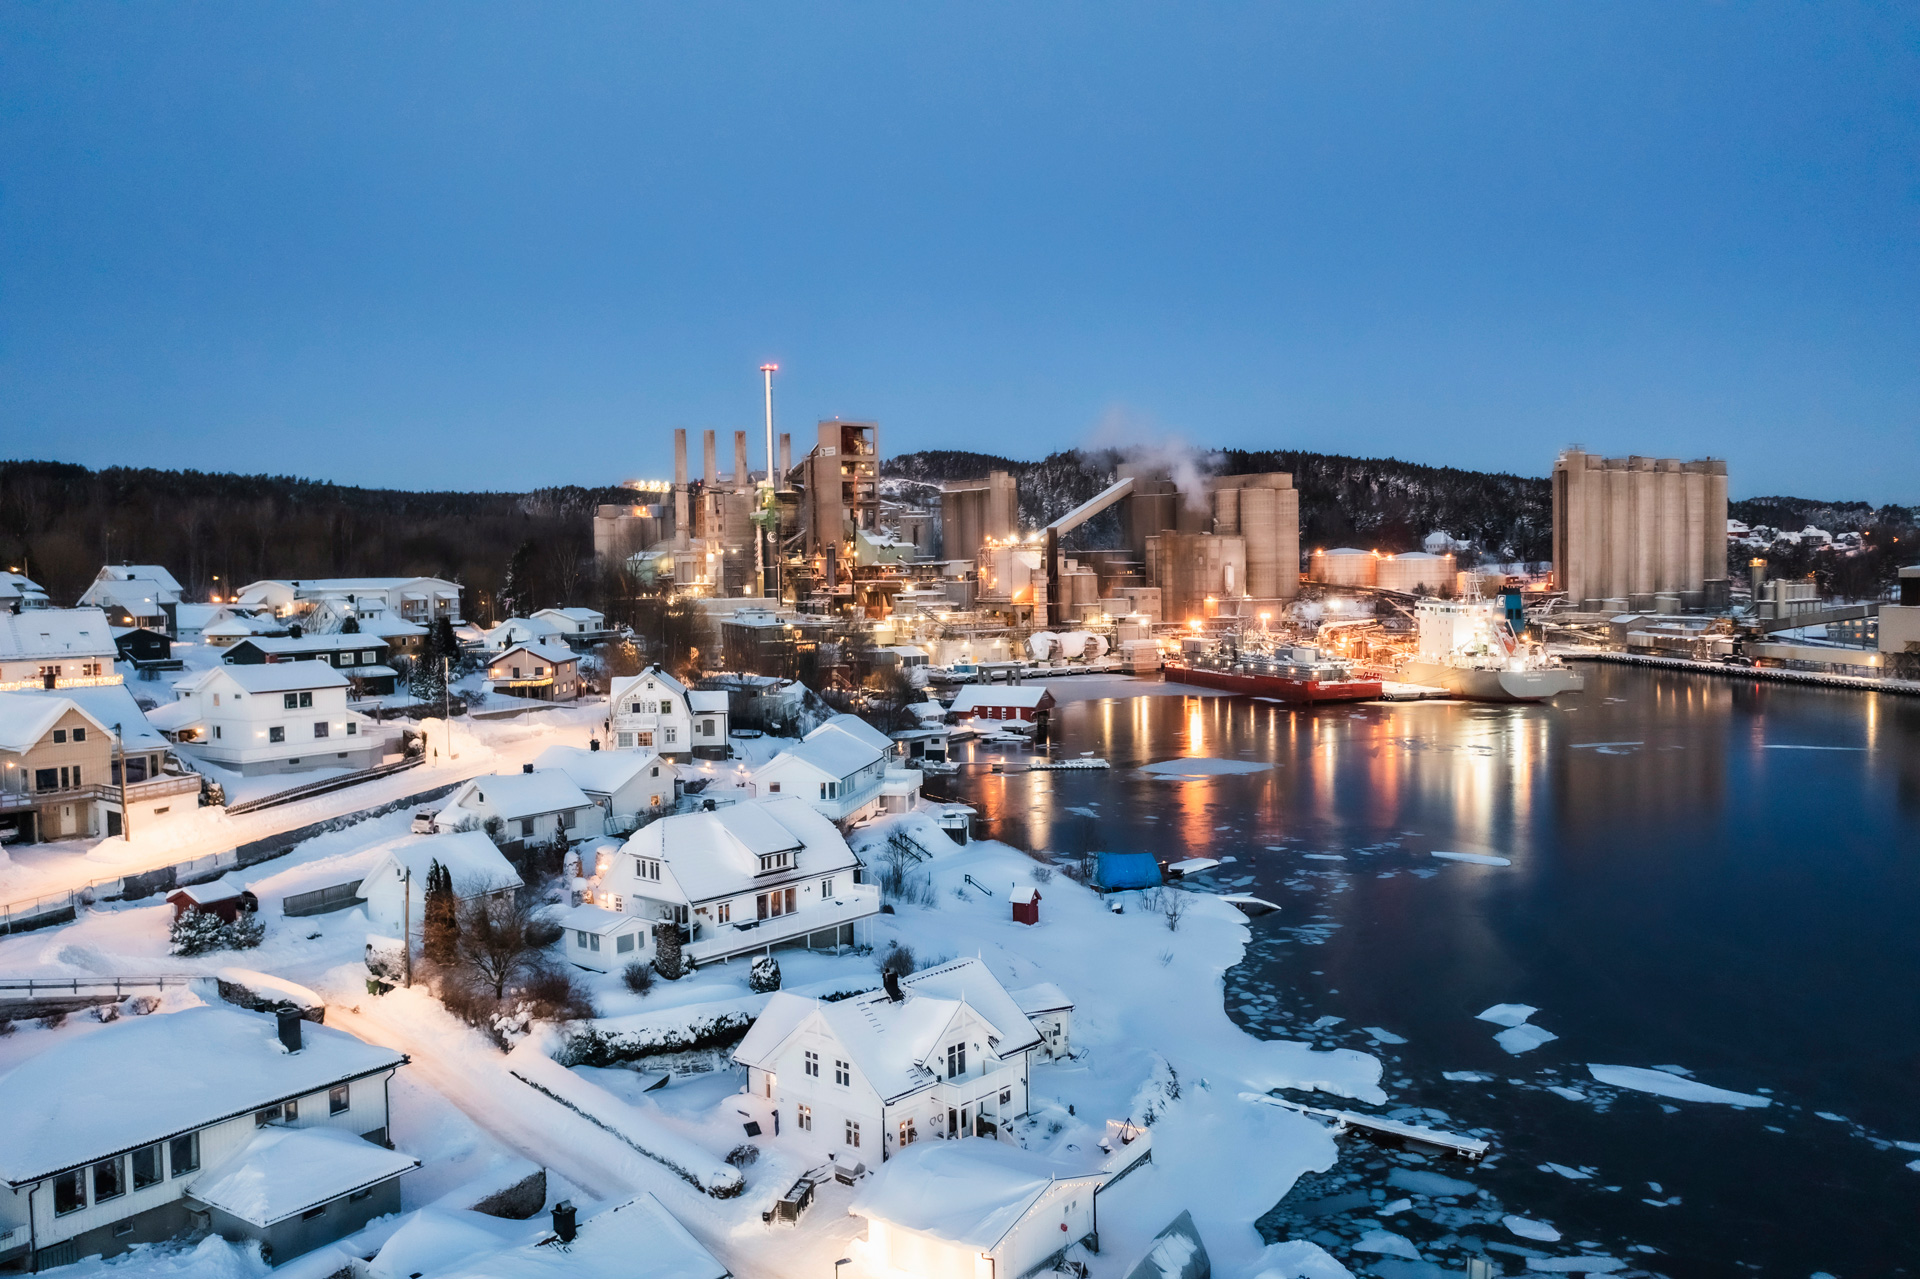 Snow-covered town by the water during twilight. In the center, there’s a cement plant with smokestacks emitting vapor. Ships are docked at the harbor nearby. Residential houses with steep roofs dot the area, and a large storage facility stands on the right side. The presence of snow and ice in the water suggests cold temperatures.